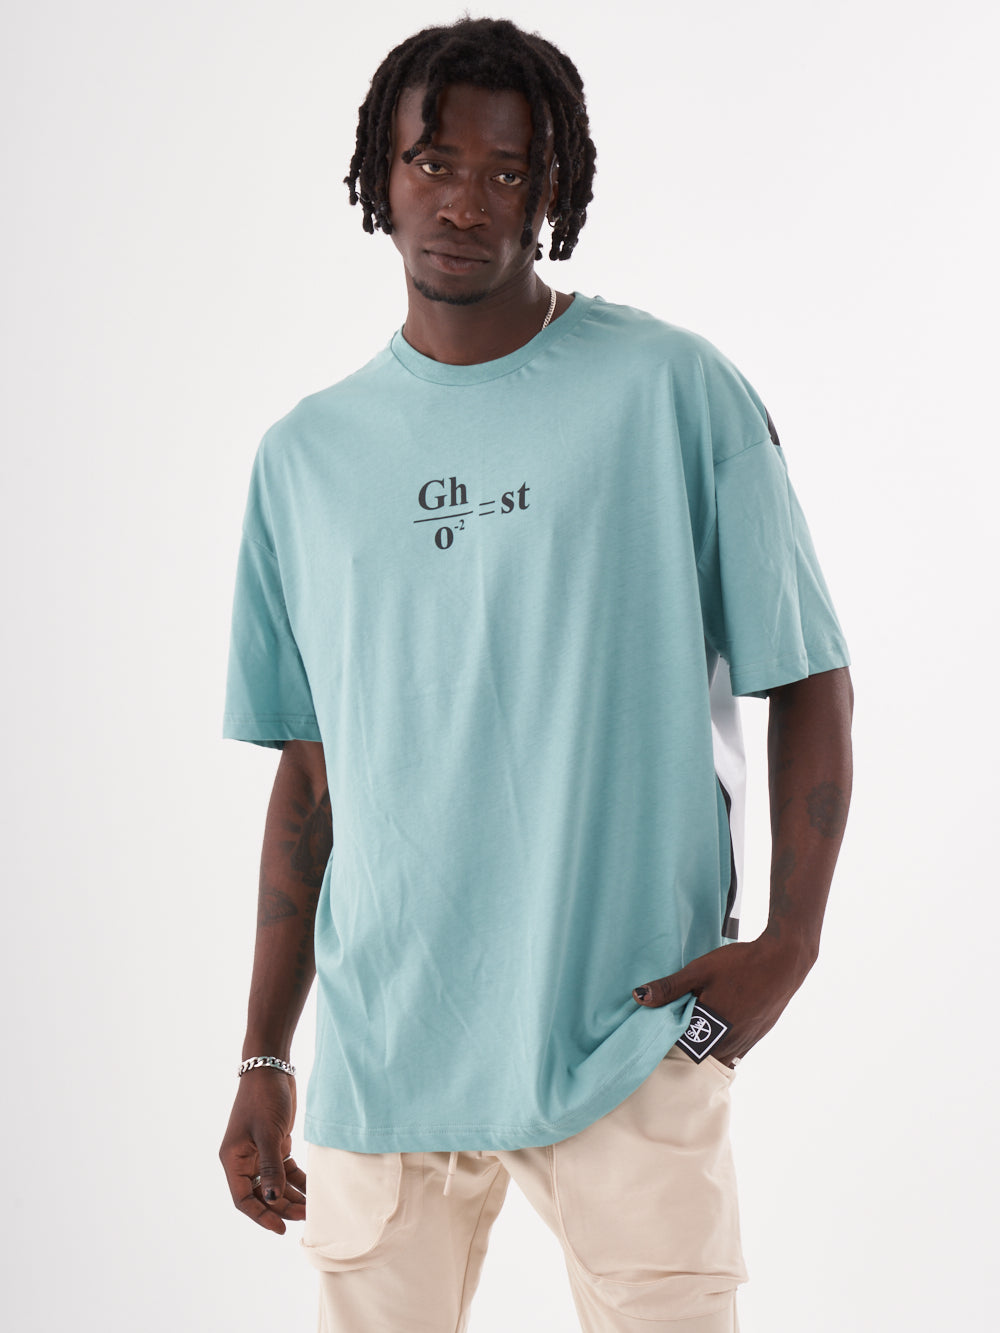 A man wearing a blue GHOST T-SHIRT with the word ghost on it.